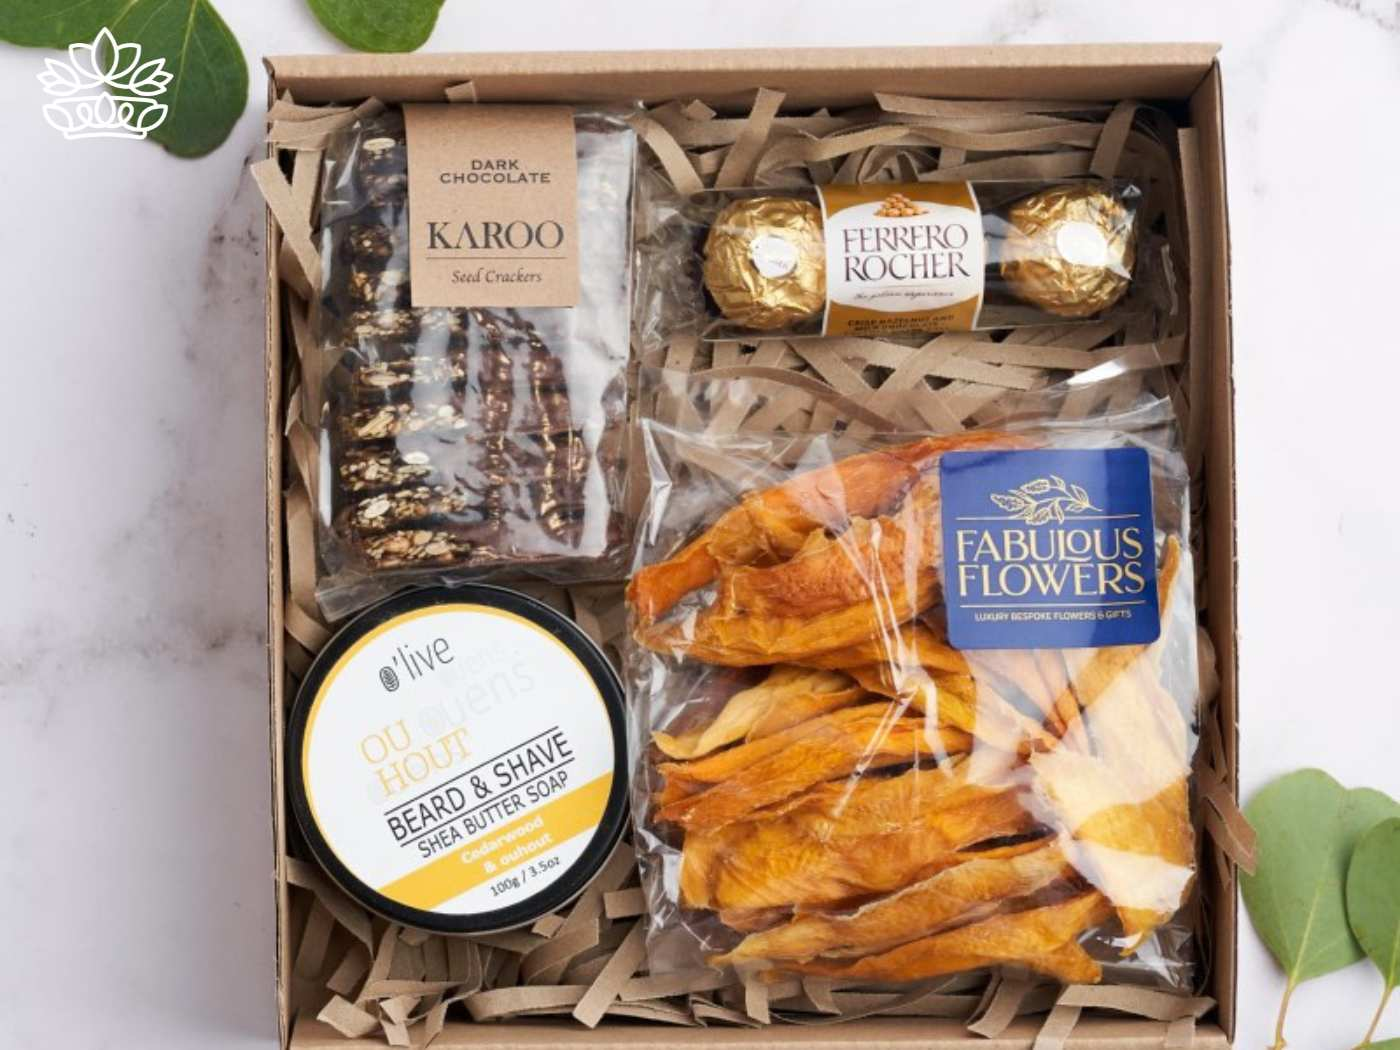 A thoughtful graduation gift box containing dark chocolate seed crackers, Ferrero Rocher chocolates, dried mango slices, and a tin of beard and shave butter soap, all beautifully arranged and ready to deliver with heart by Fabulous Flowers and Gifts.